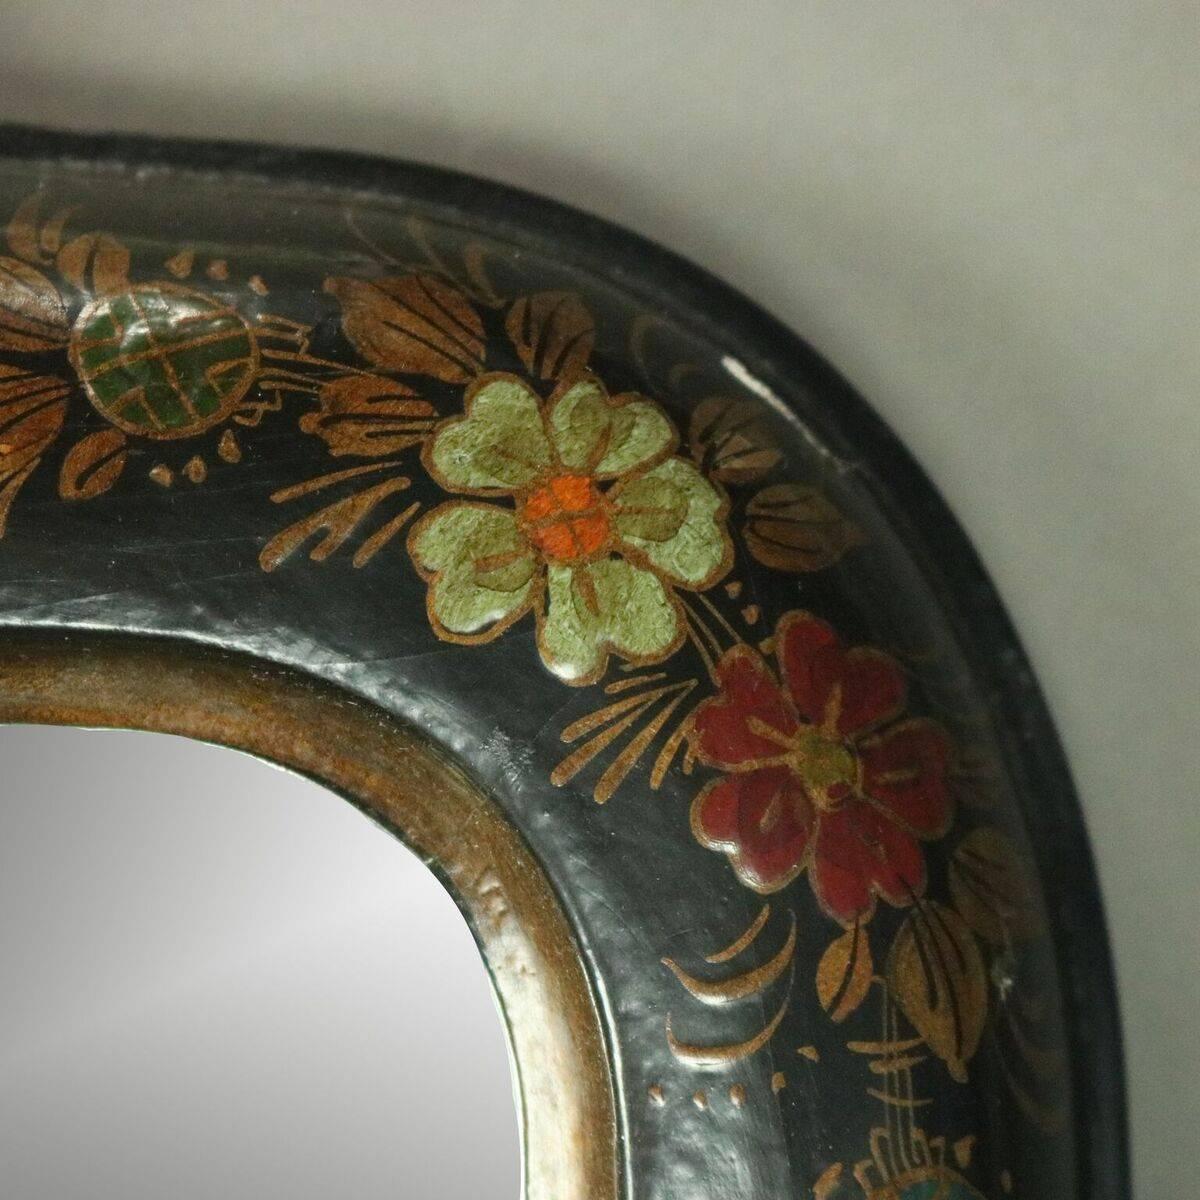 Vintage hand-painted wall mirror features chinoiserie decorated ebonized and gilt surround figures, butterflies, and foliage, circa 1930

Measures: 36.5